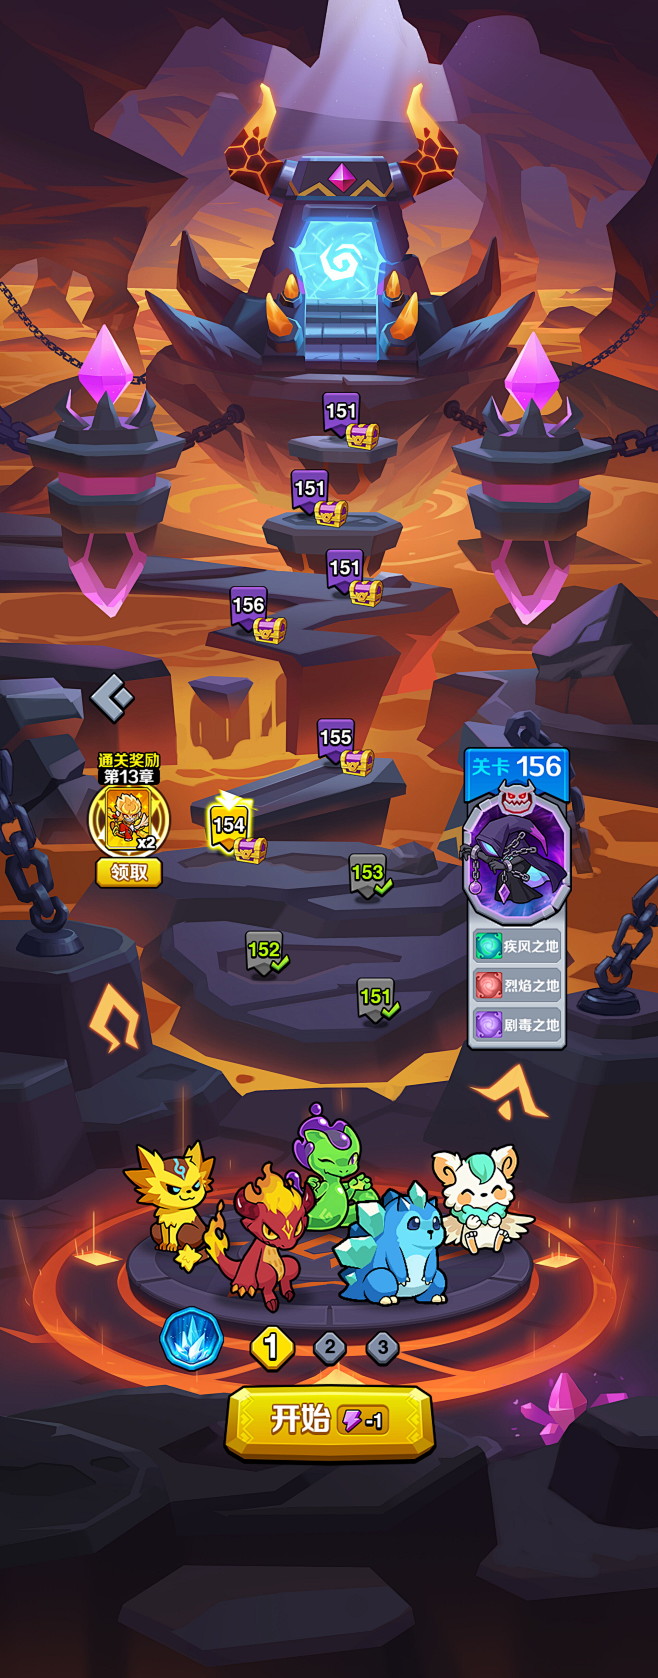 Tower defense game s...